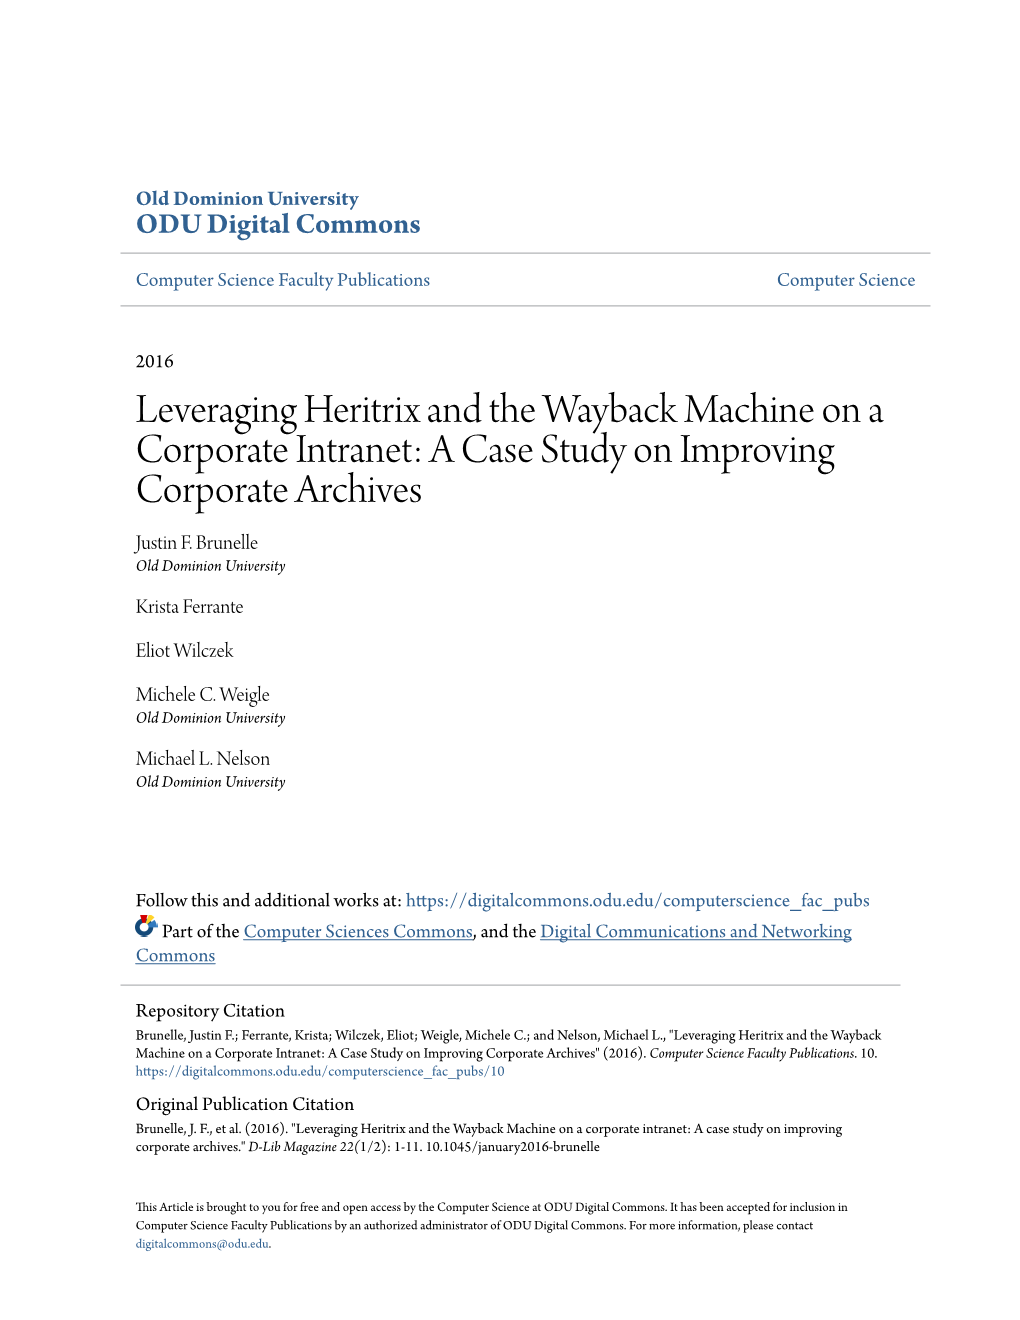 Leveraging Heritrix and the Wayback Machine on a Corporate Intranet: a Case Study on Improving Corporate Archives Justin F